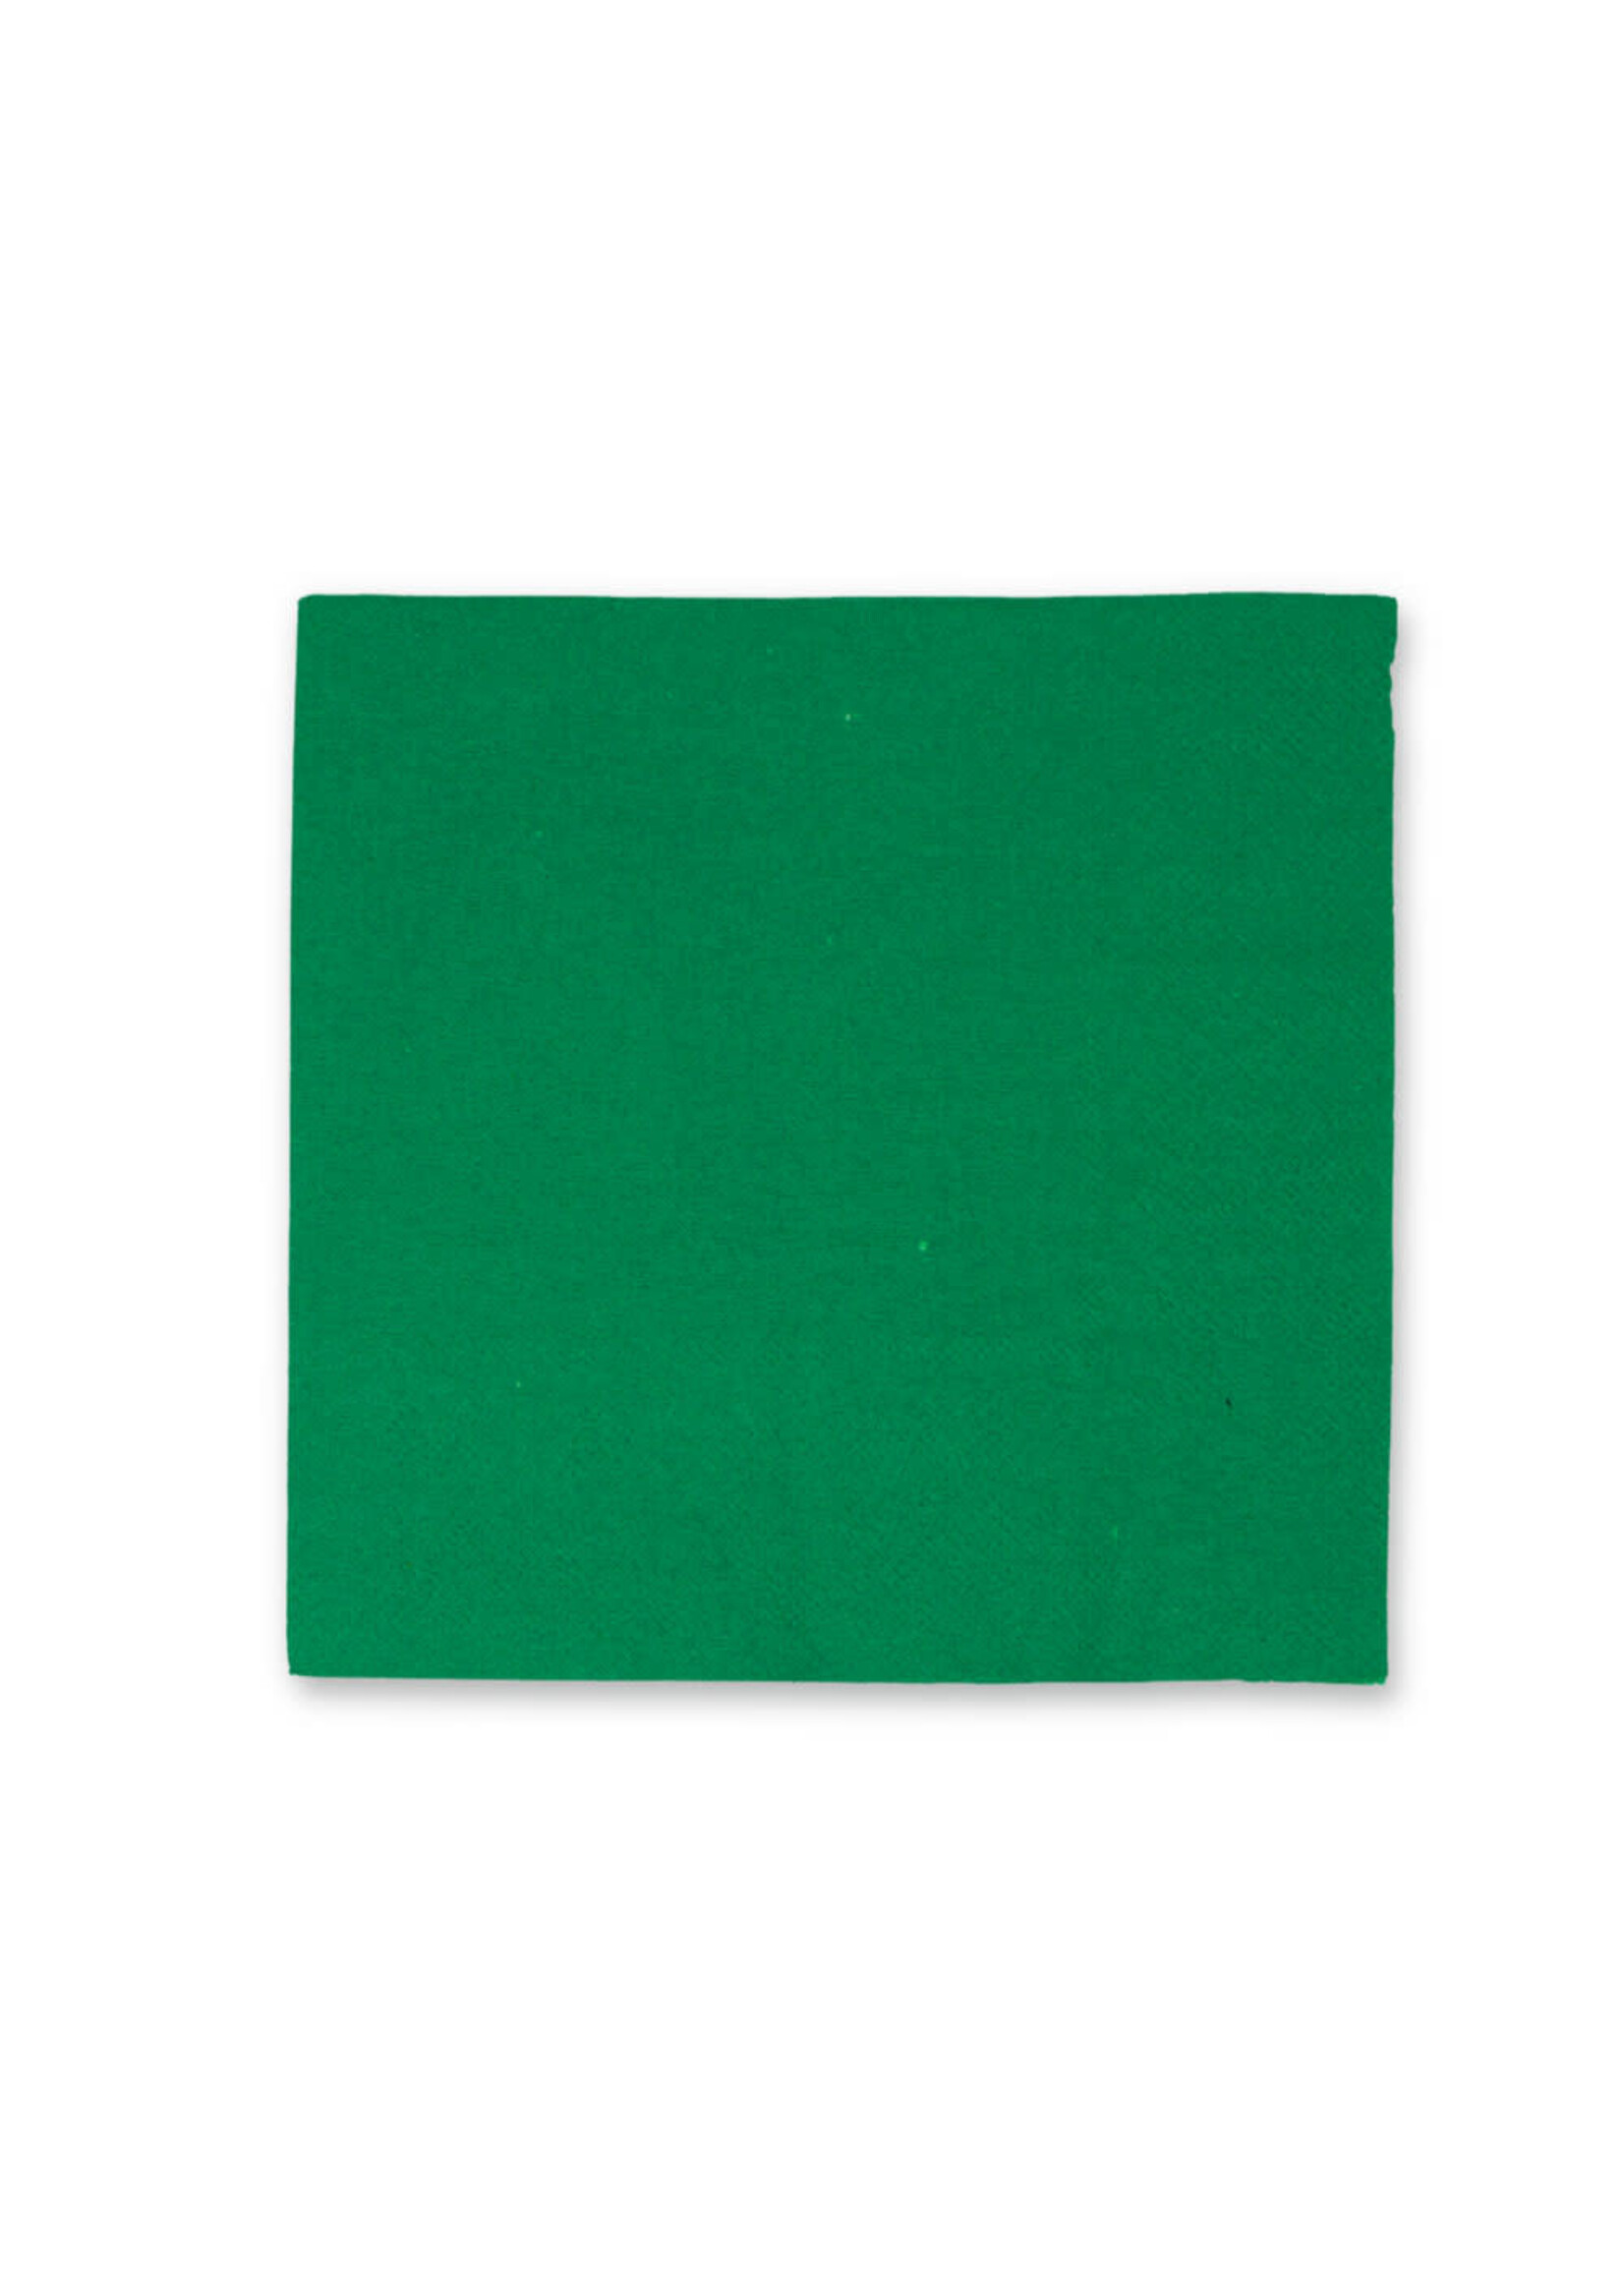 LUNCH NAPKIN 50CT 2PLY GREEN